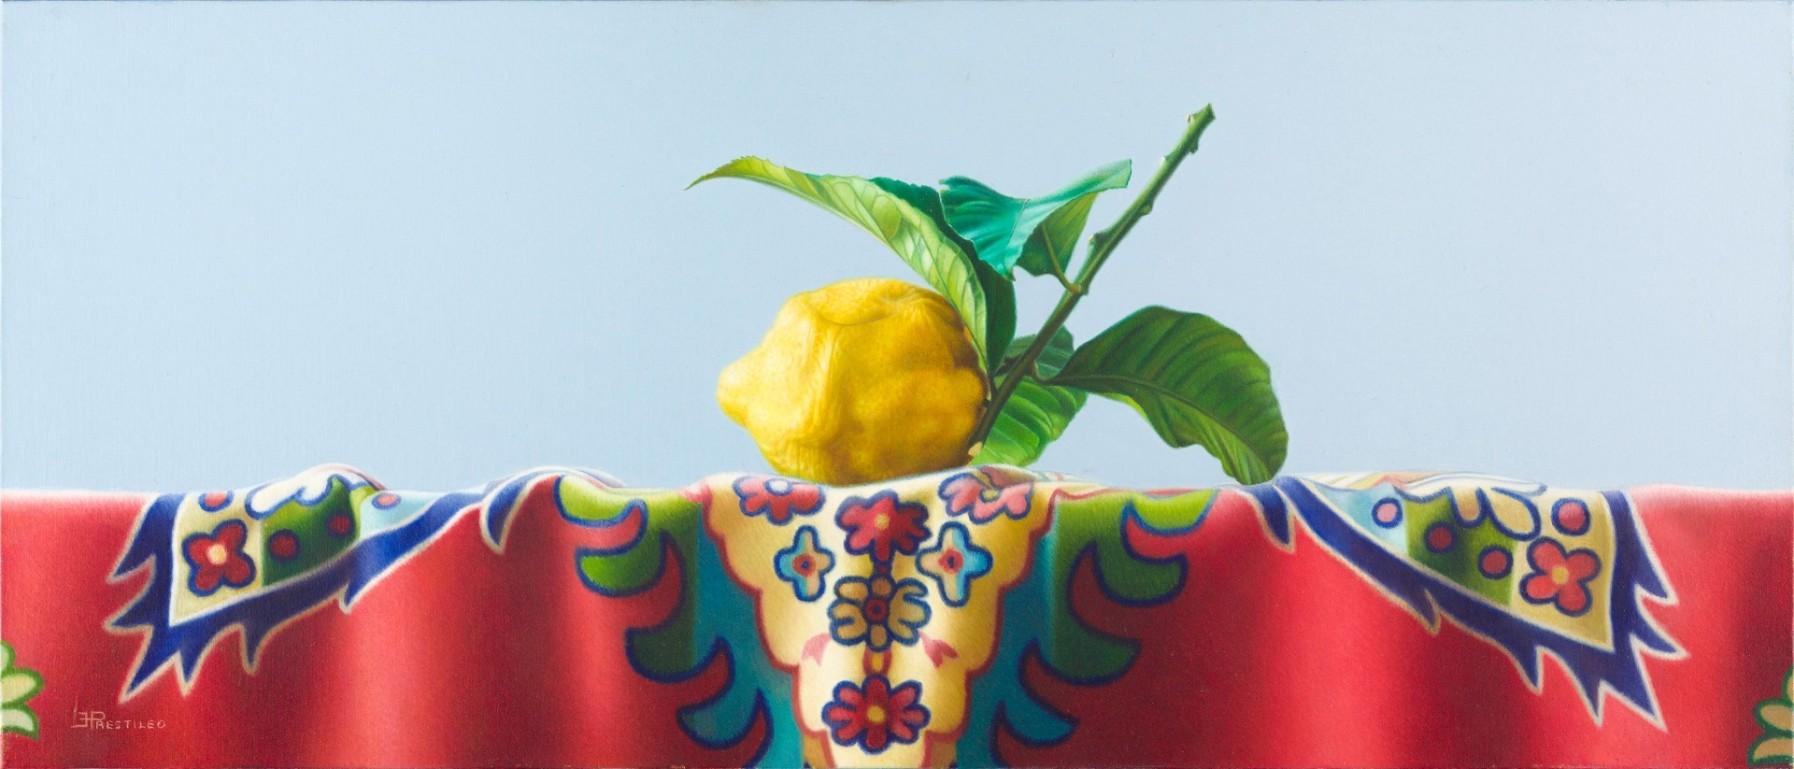 Lemon s an original artwork realized by the italian painter Enzo Prestileo in 2007.

Mixed colored oil on canvas.

The artwork is hand-signed on the lower left margin.

The artwork depict a still life lemon on a table and it's characterized by very